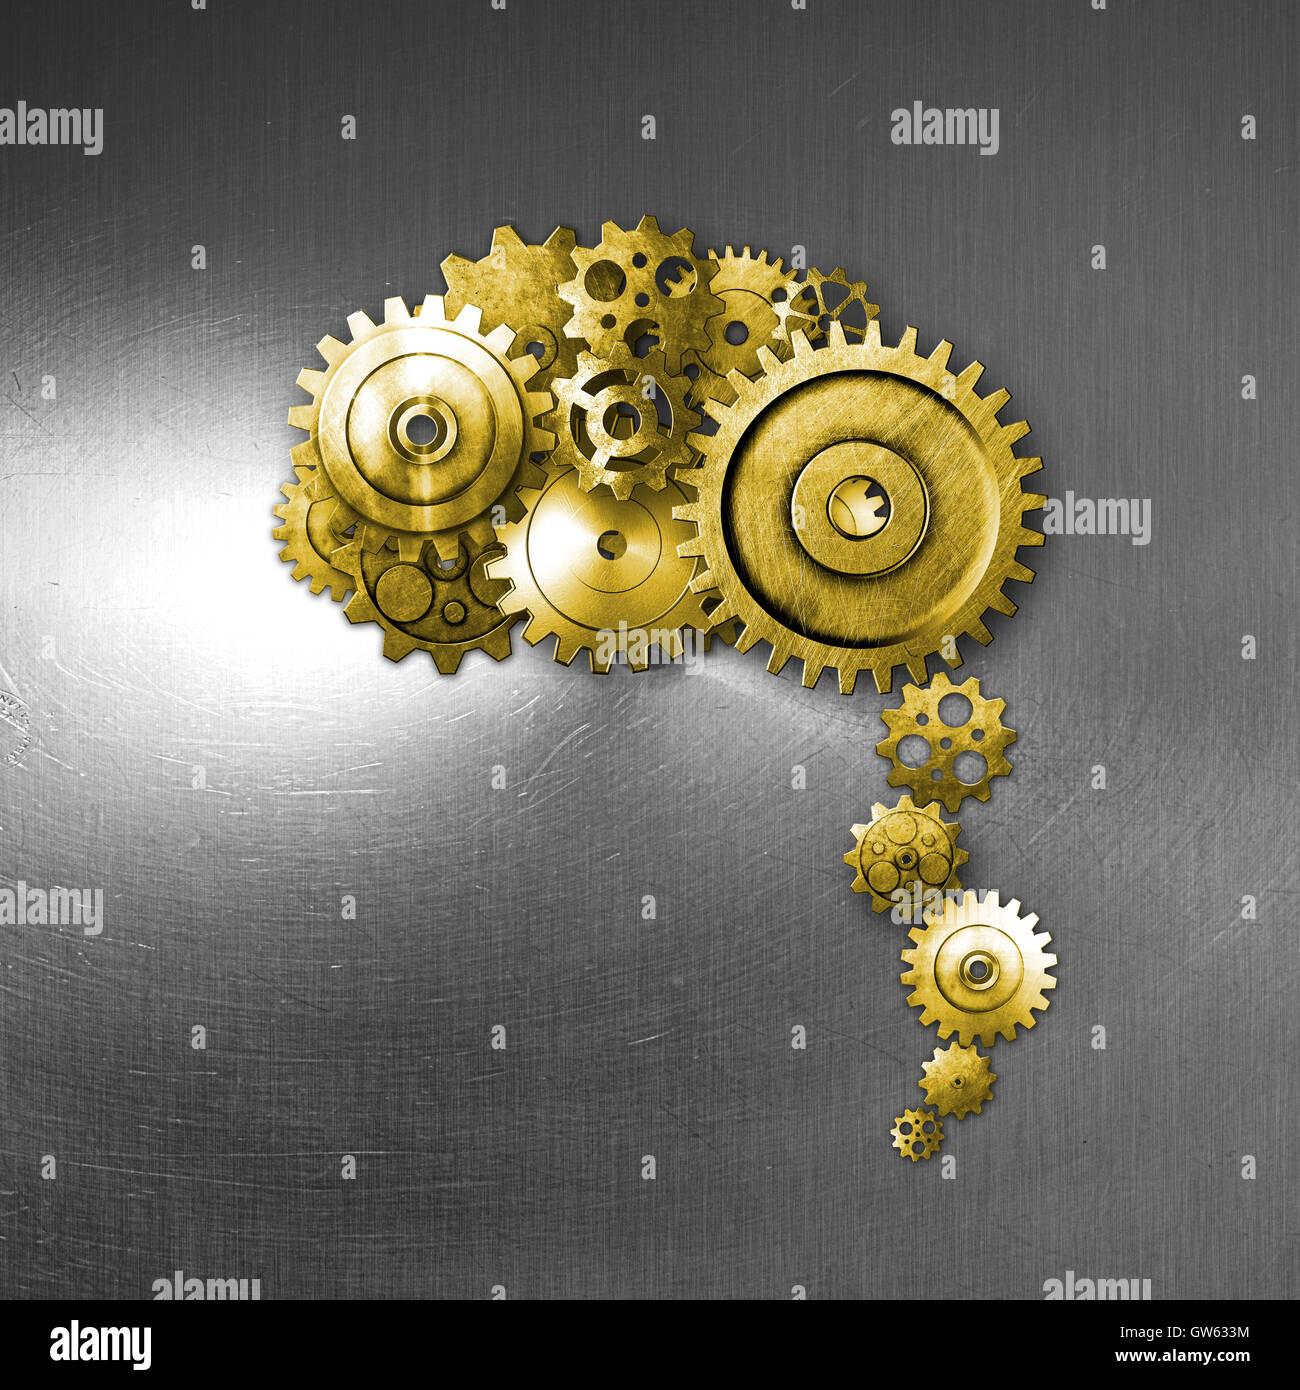 gold metal gear on metal background look like a human brain. material design. 3d illustration. Stock Photo